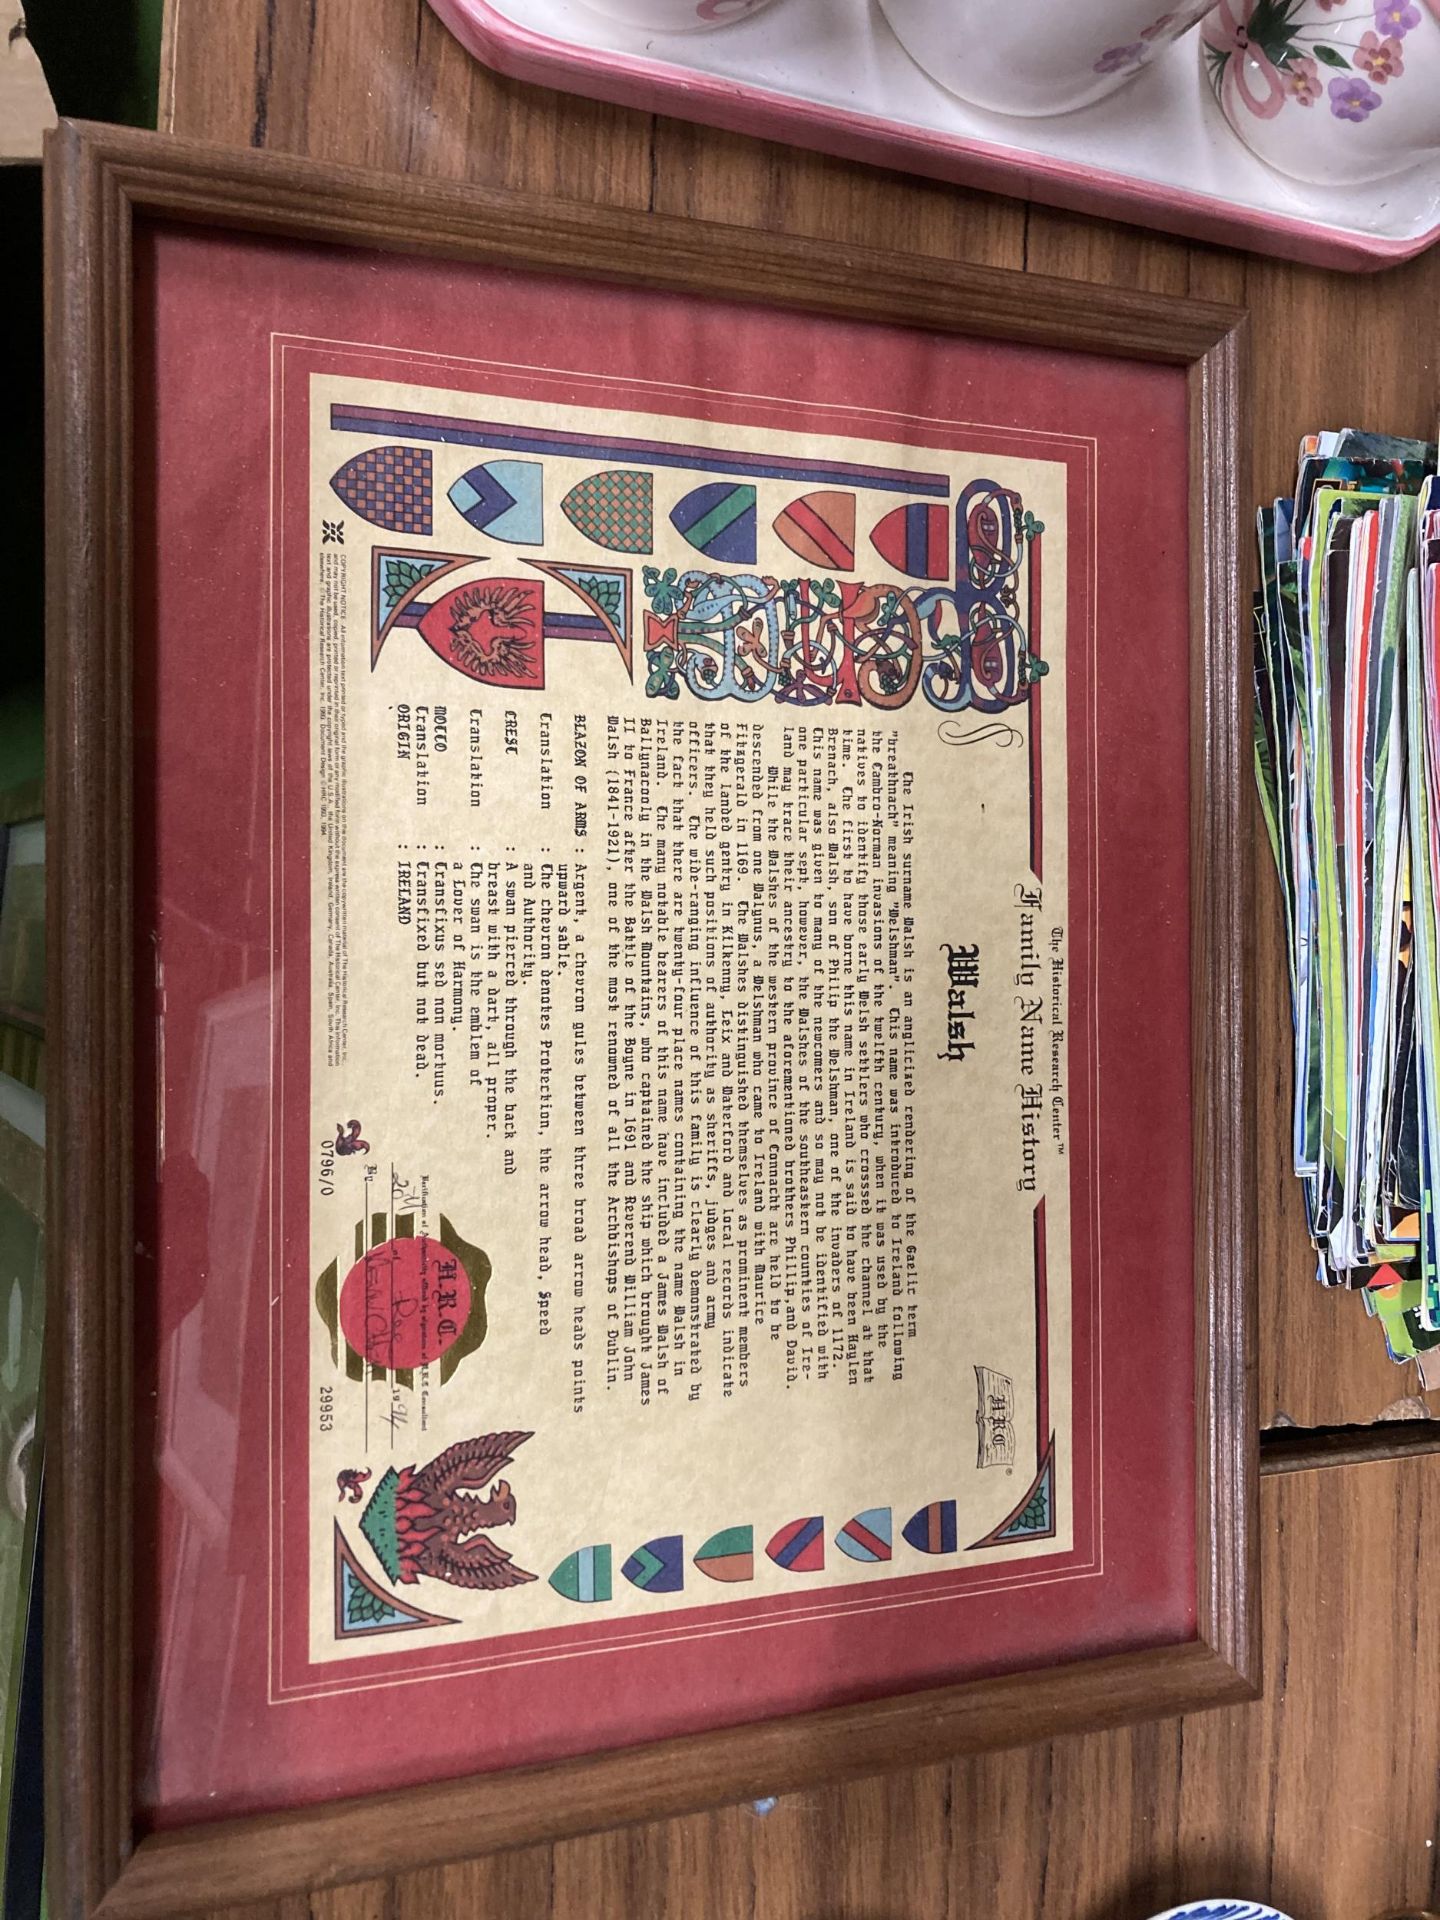 A FRAMED FAMILY NAME HISTORY 'WALSH' DATED 1994